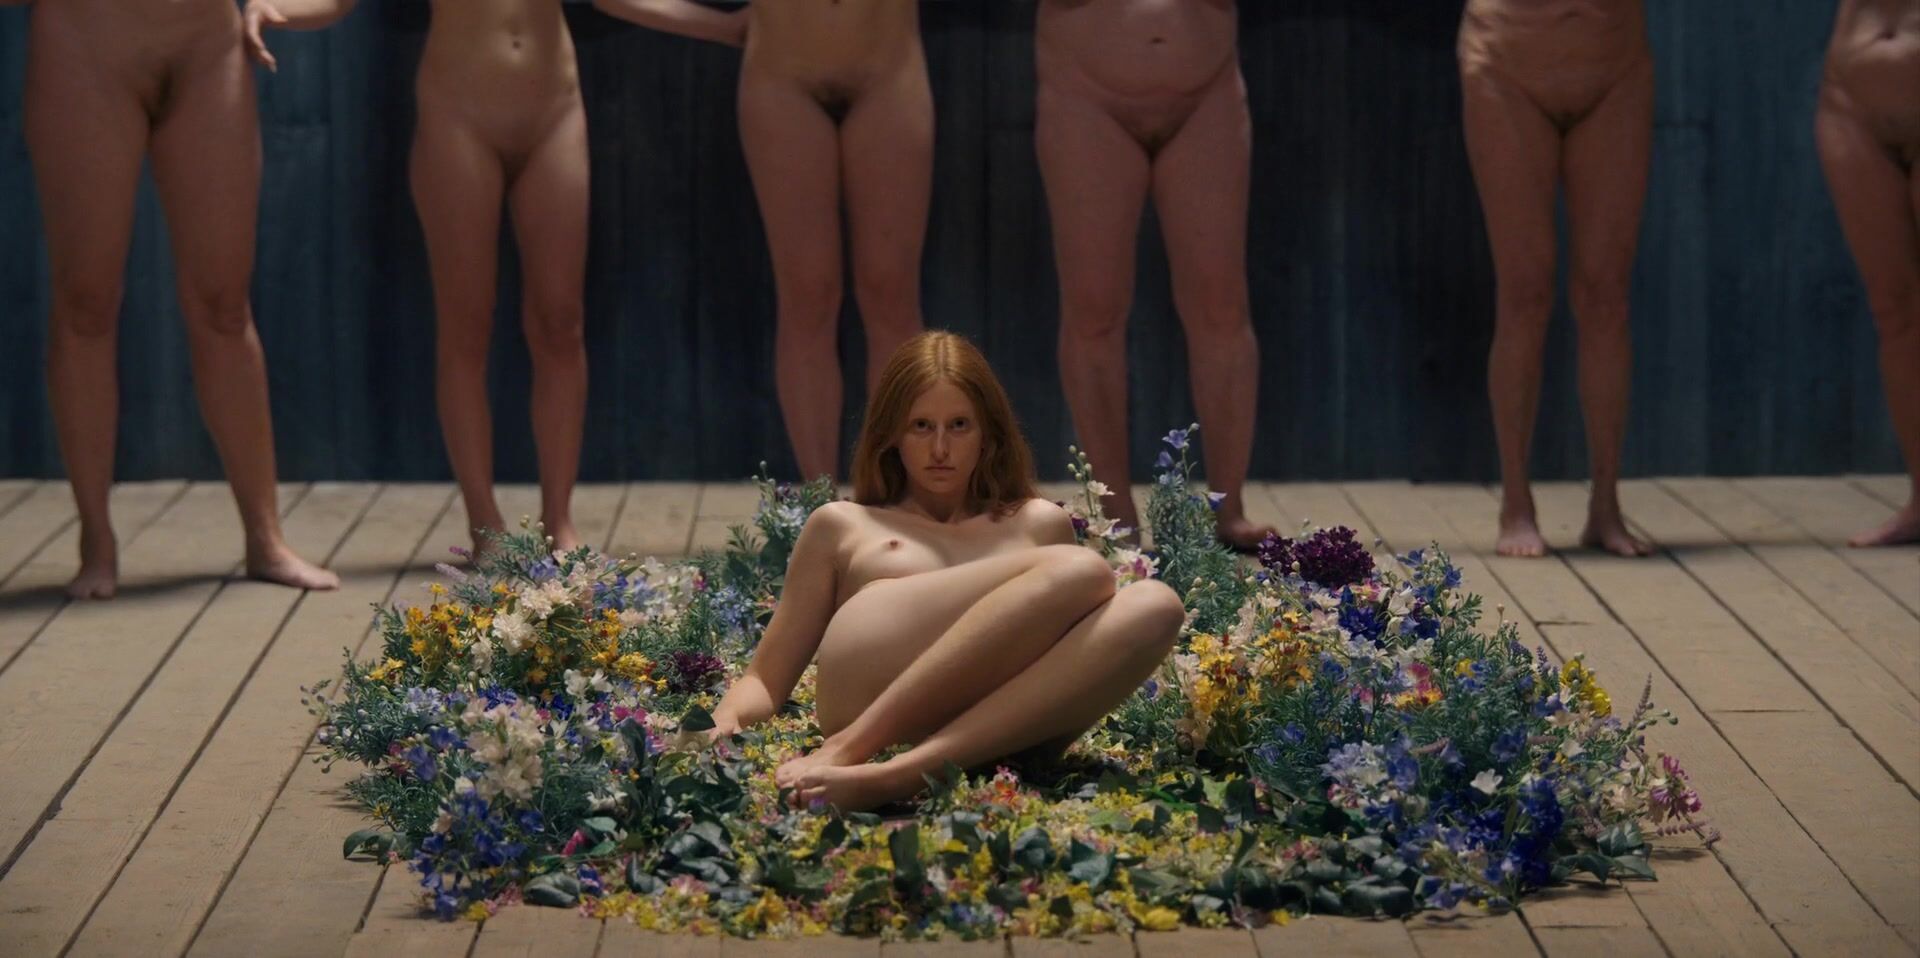 Assfucking Nude Isabelle Grill sex scene from Midsommar (2019) Doggy Style